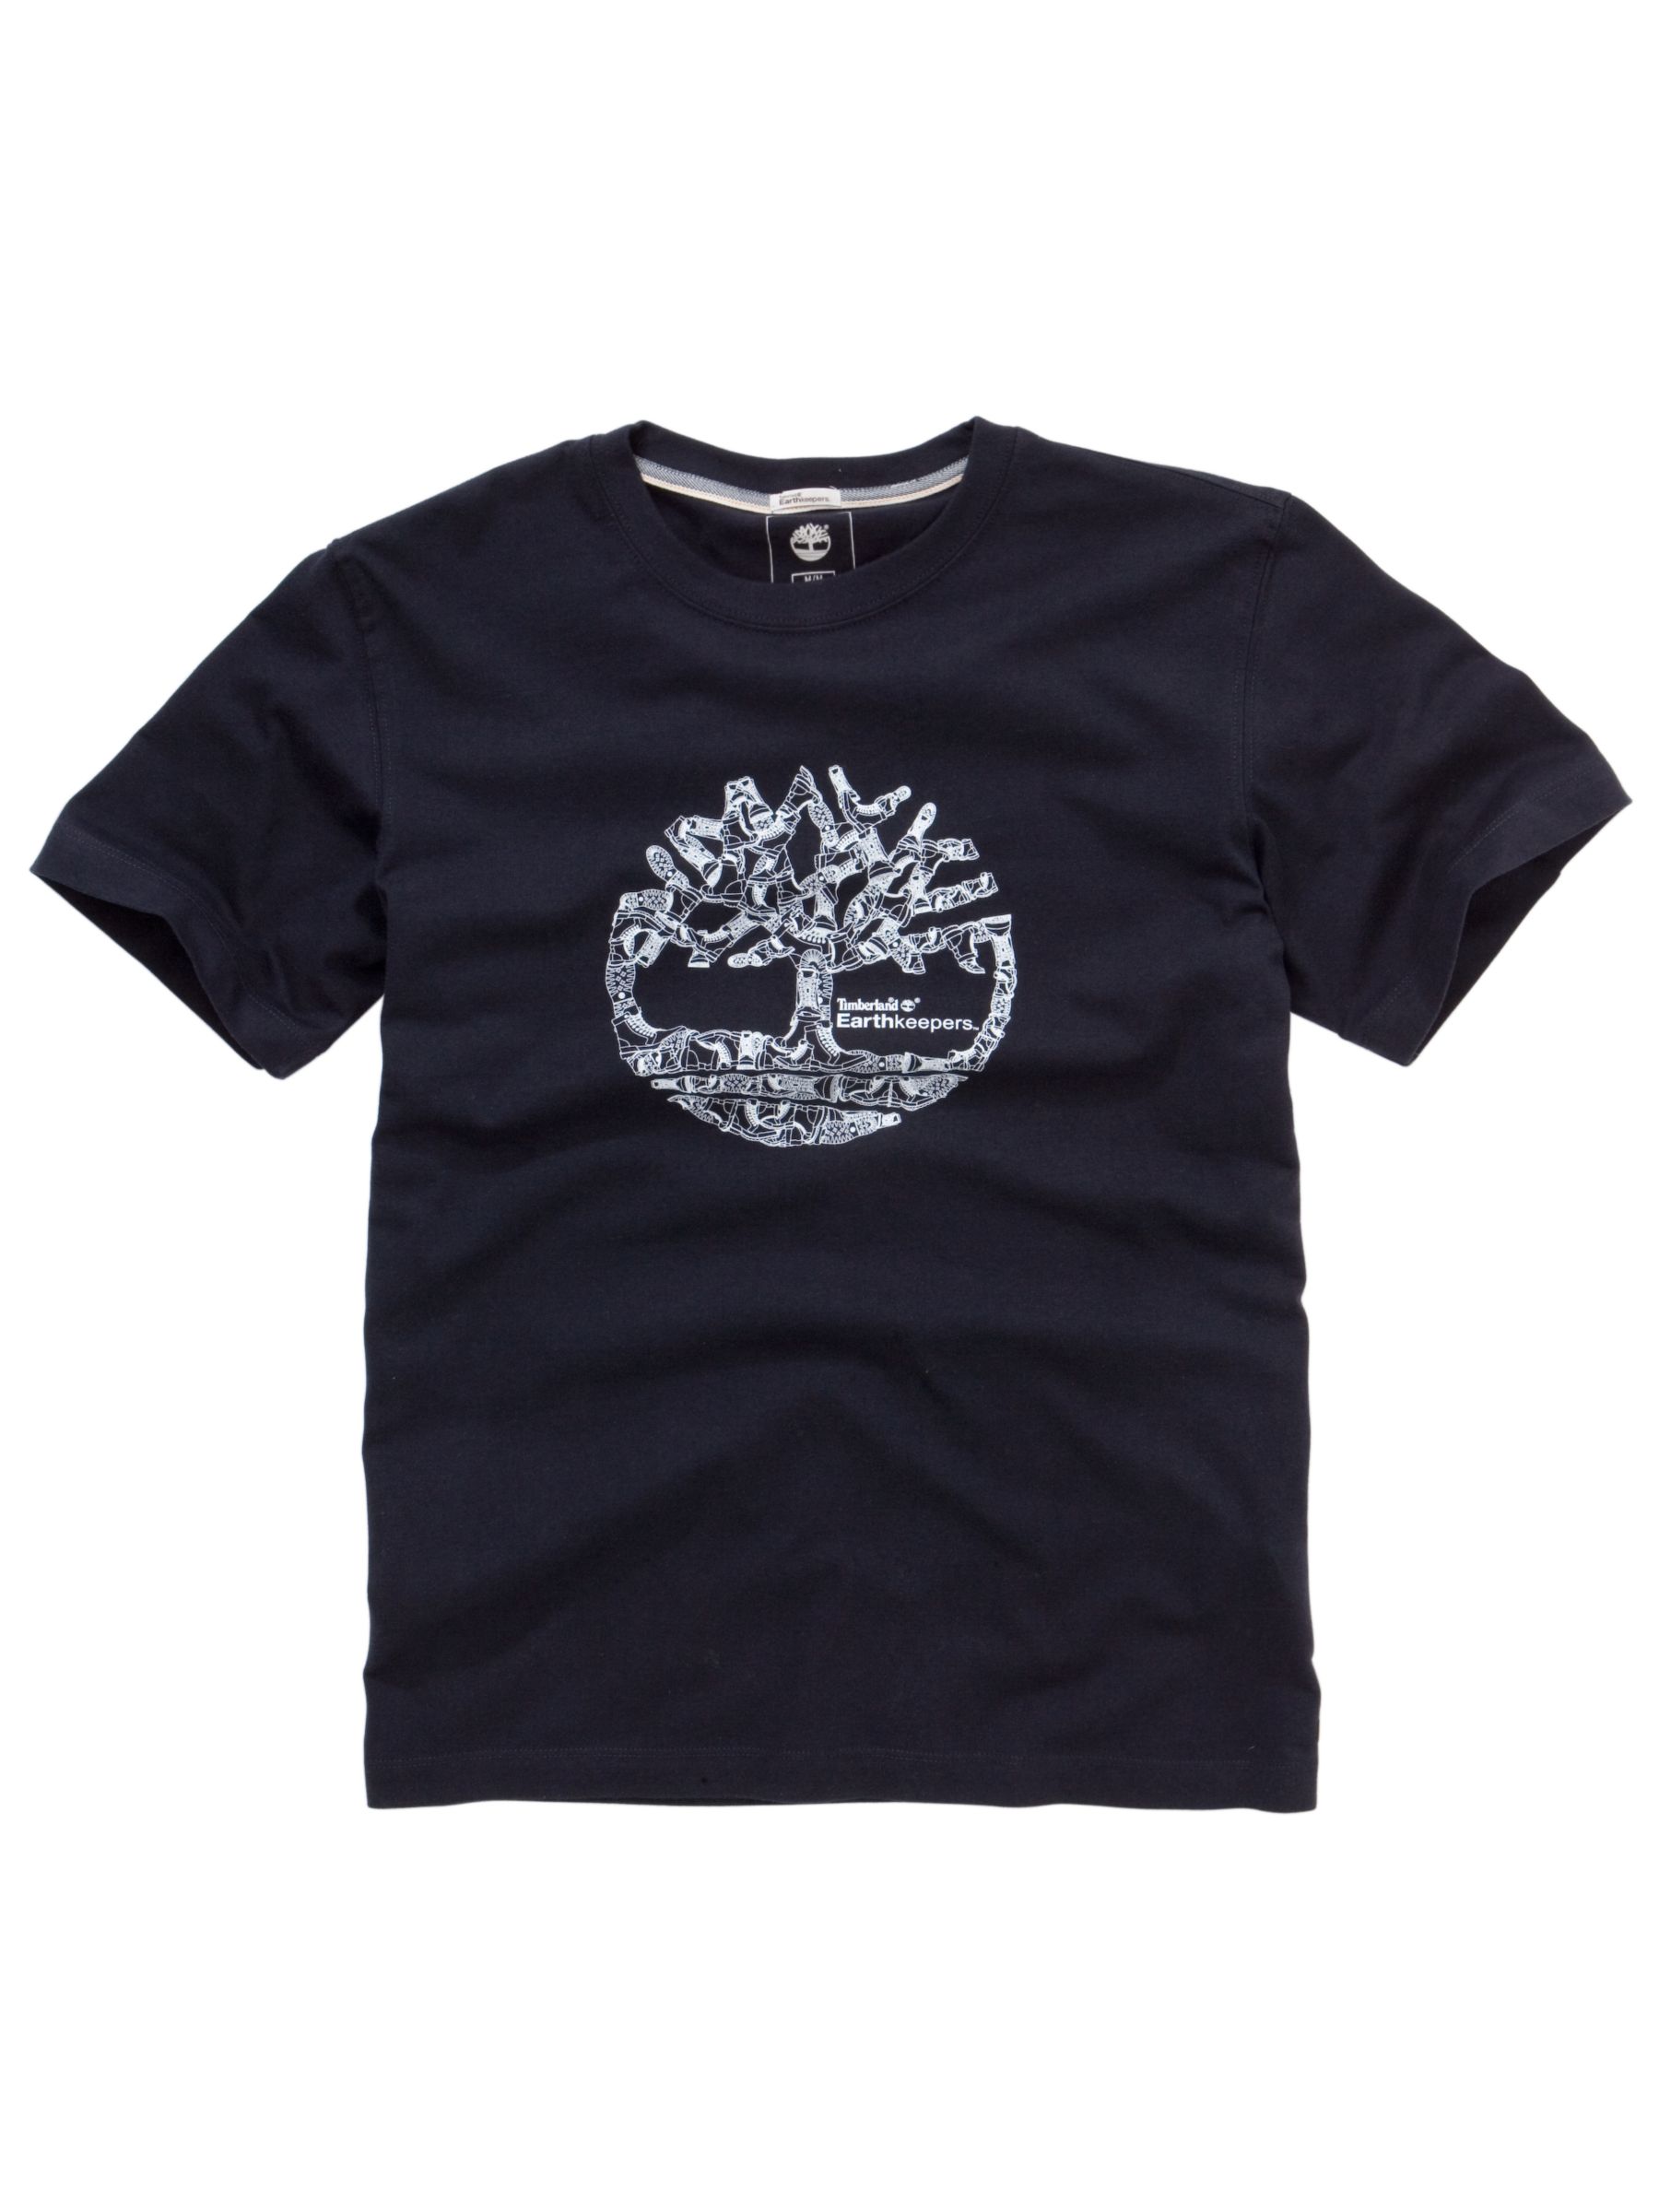 Timberland Earthkeepers Boot Tree T-Shirt, Navy